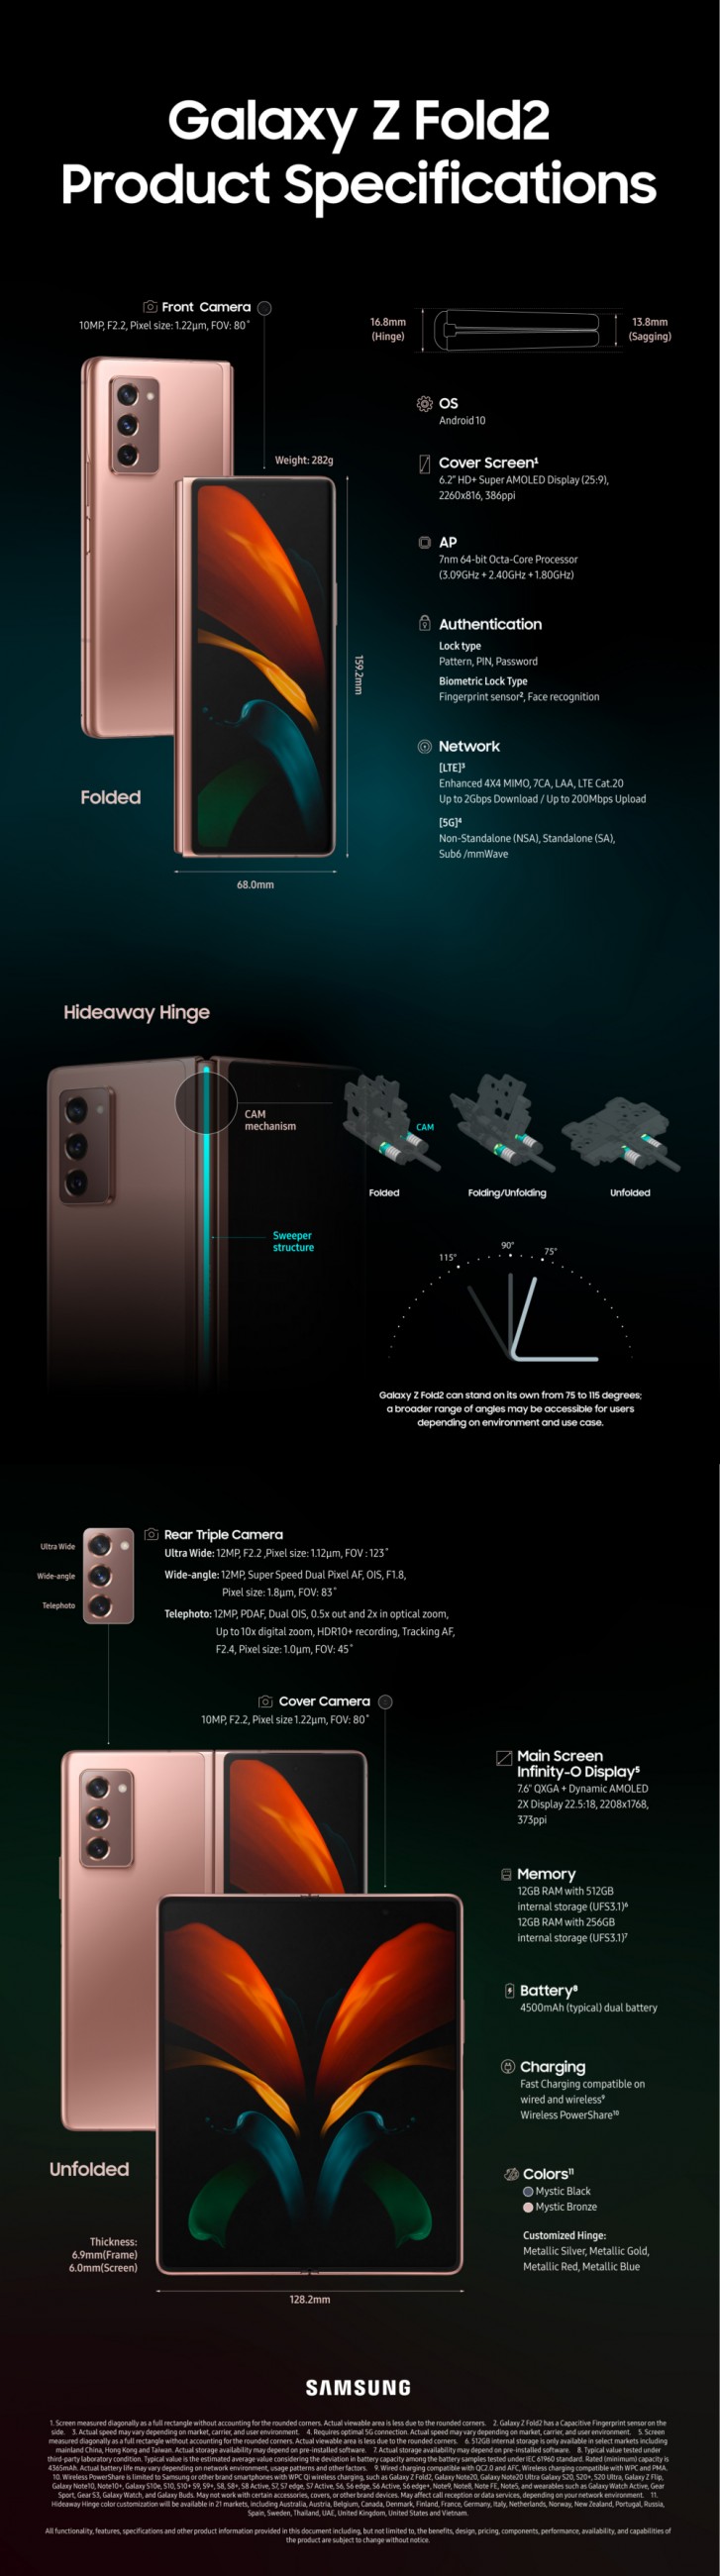 Samsung's Galaxy Z Fold2 infographic covers the basics